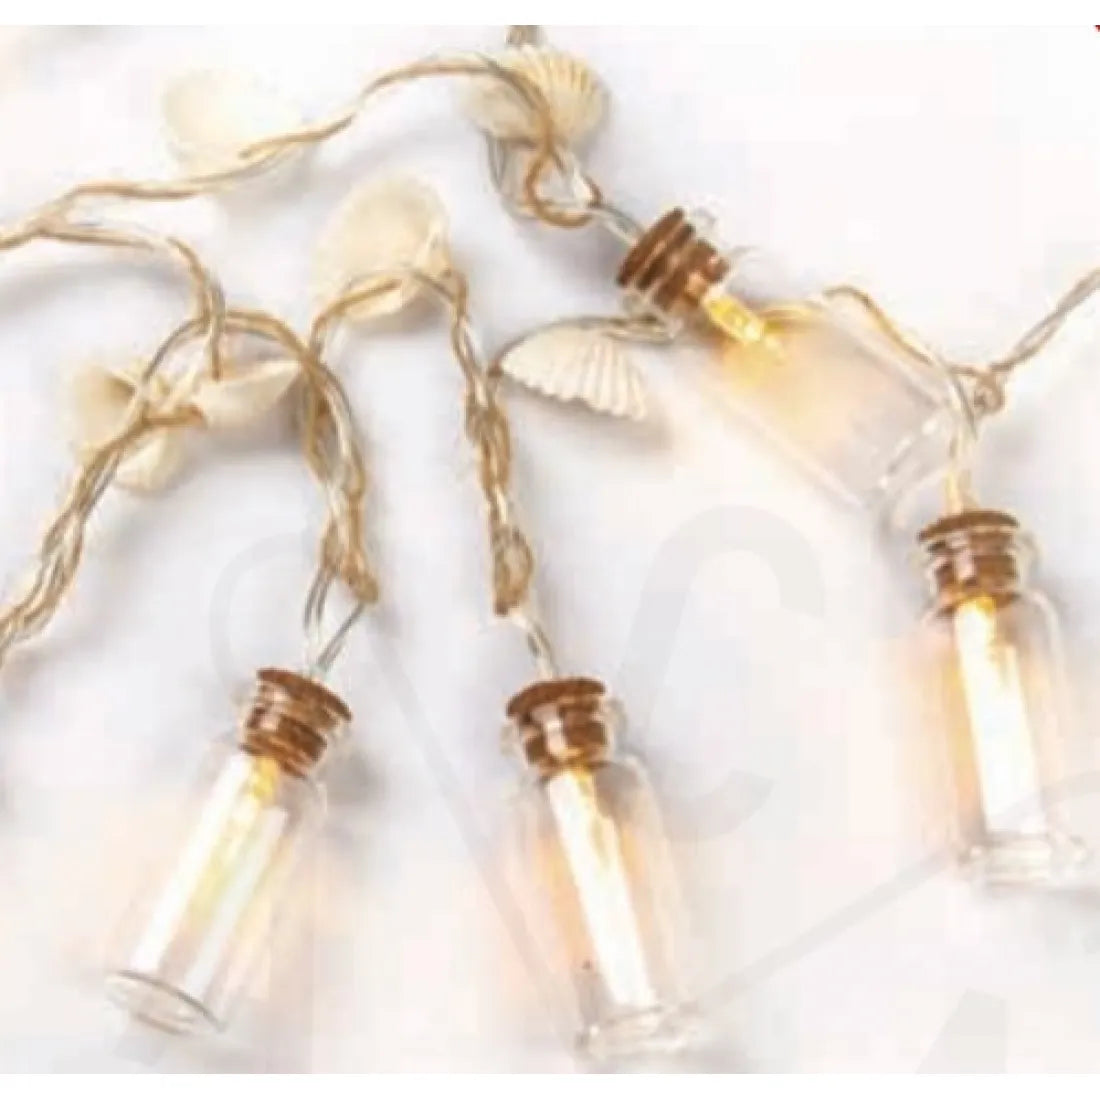 GLASS BOTTLE - SHELL", 10 LED ΛΑΜΠΑΚΙΑ ΣΕΙΡΑ ΜΠΑΤΑΡΙΕΣ (2xAA), WW, IP20, 135+30cm, ΔΙΑΦ. ΚΑΛ. ΤΡΟΦ.